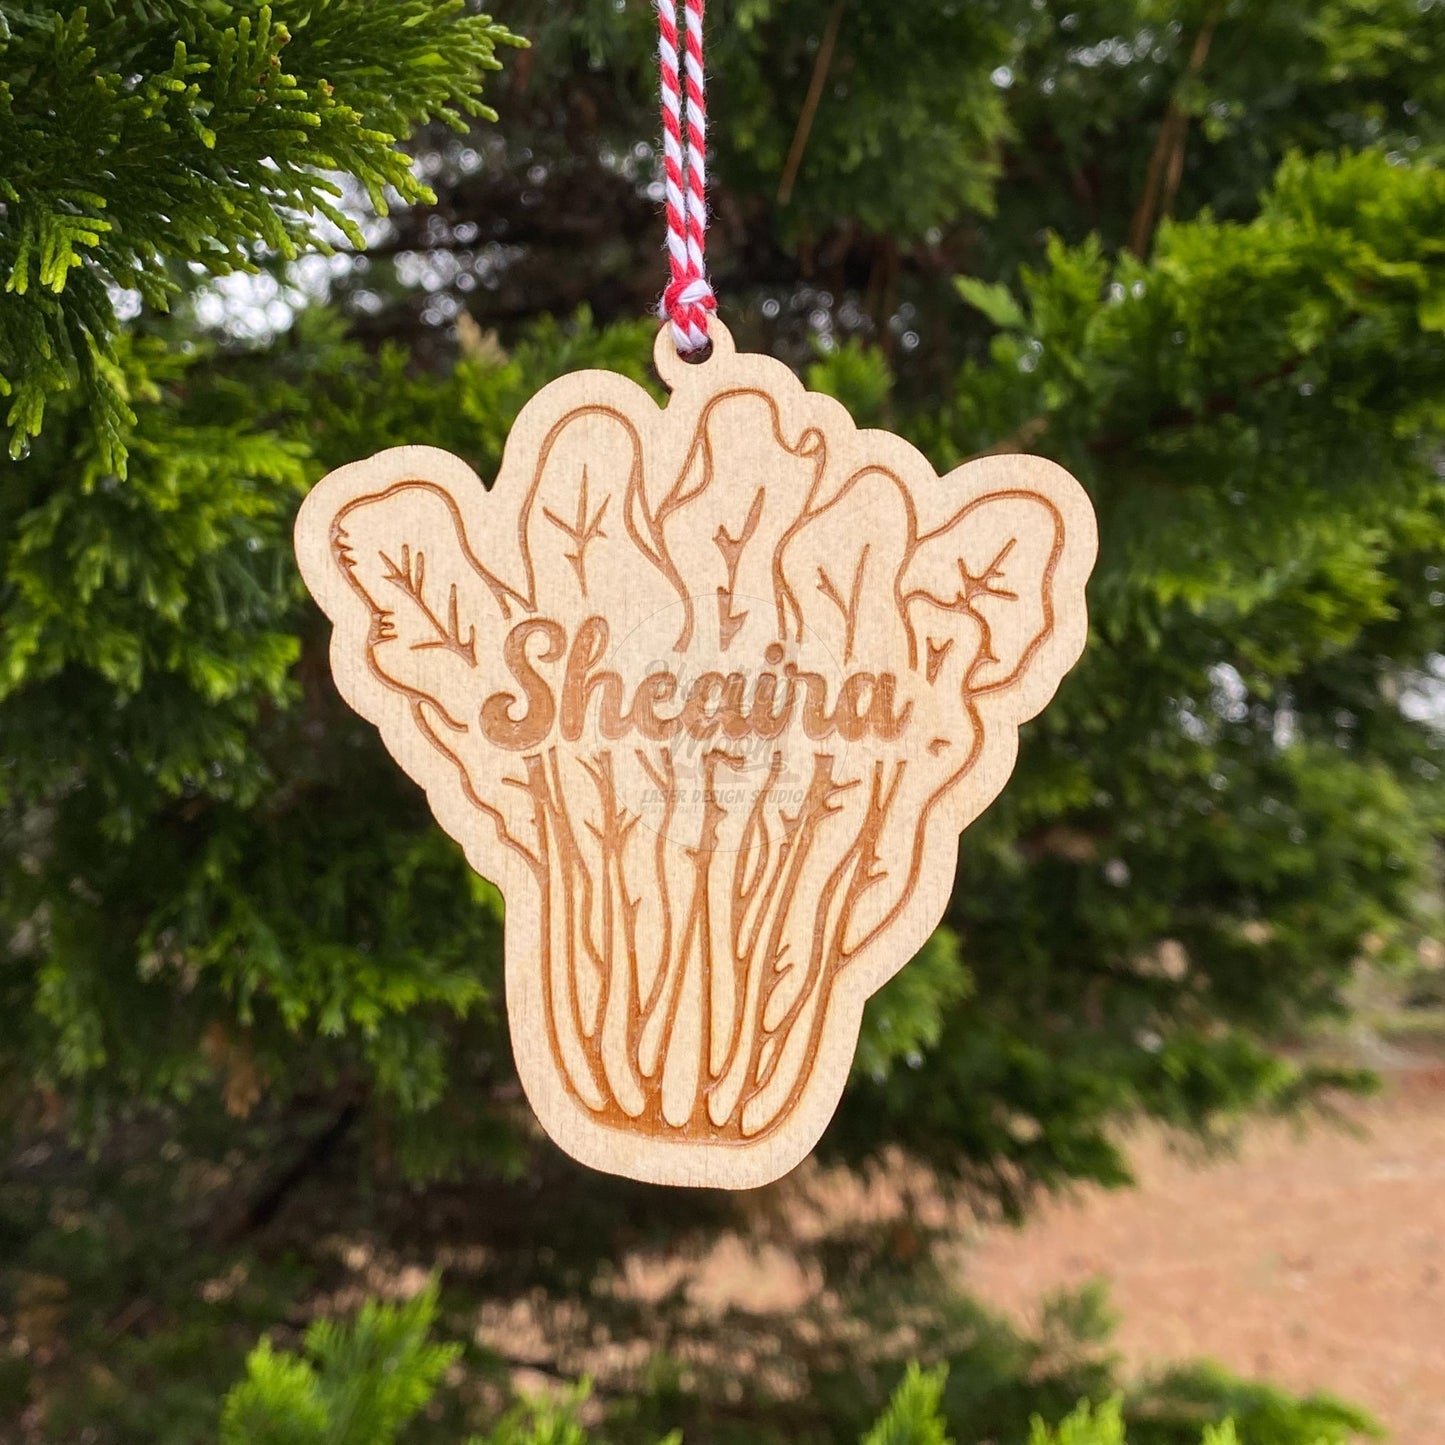 Personalized romaine lettuce ornament from Howling Moon Laser Design in Virginia, USA